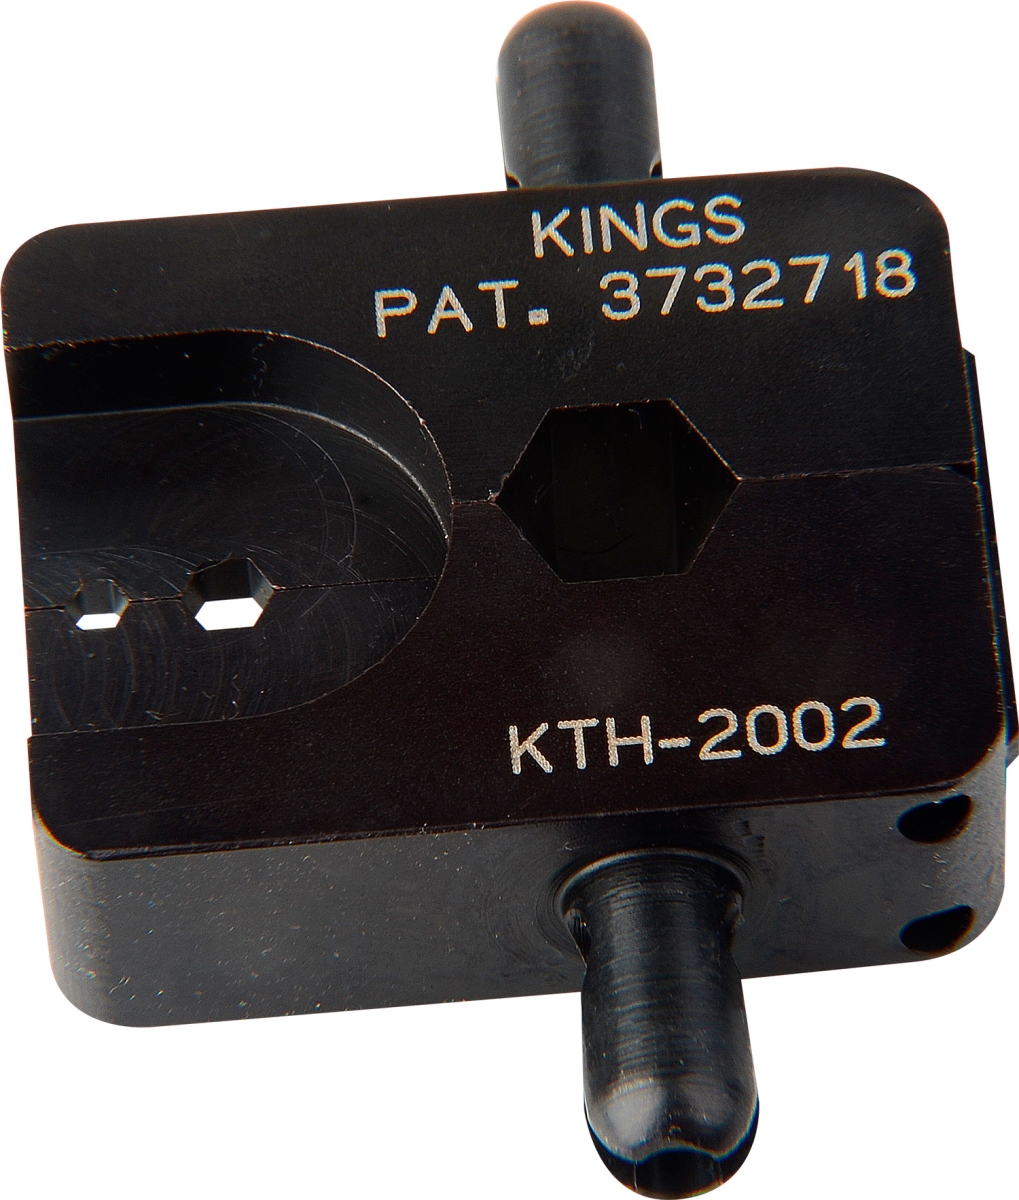 Kth-2040 Triax Die Set For Belden 8233 Cable